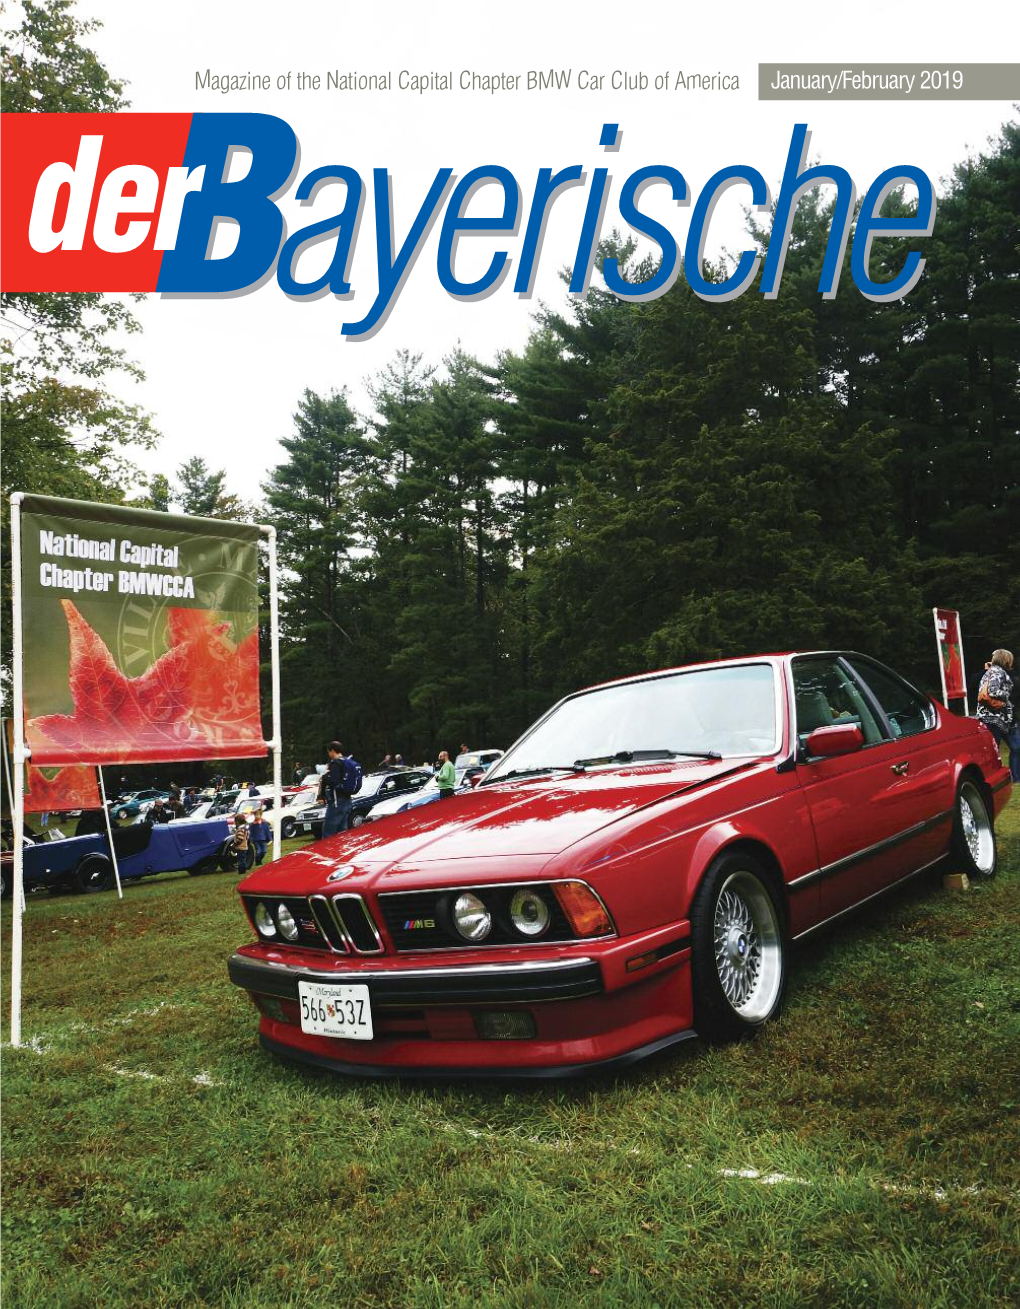 Magazine of the National Capital Chapter BMW Car Club of America January/February 2019